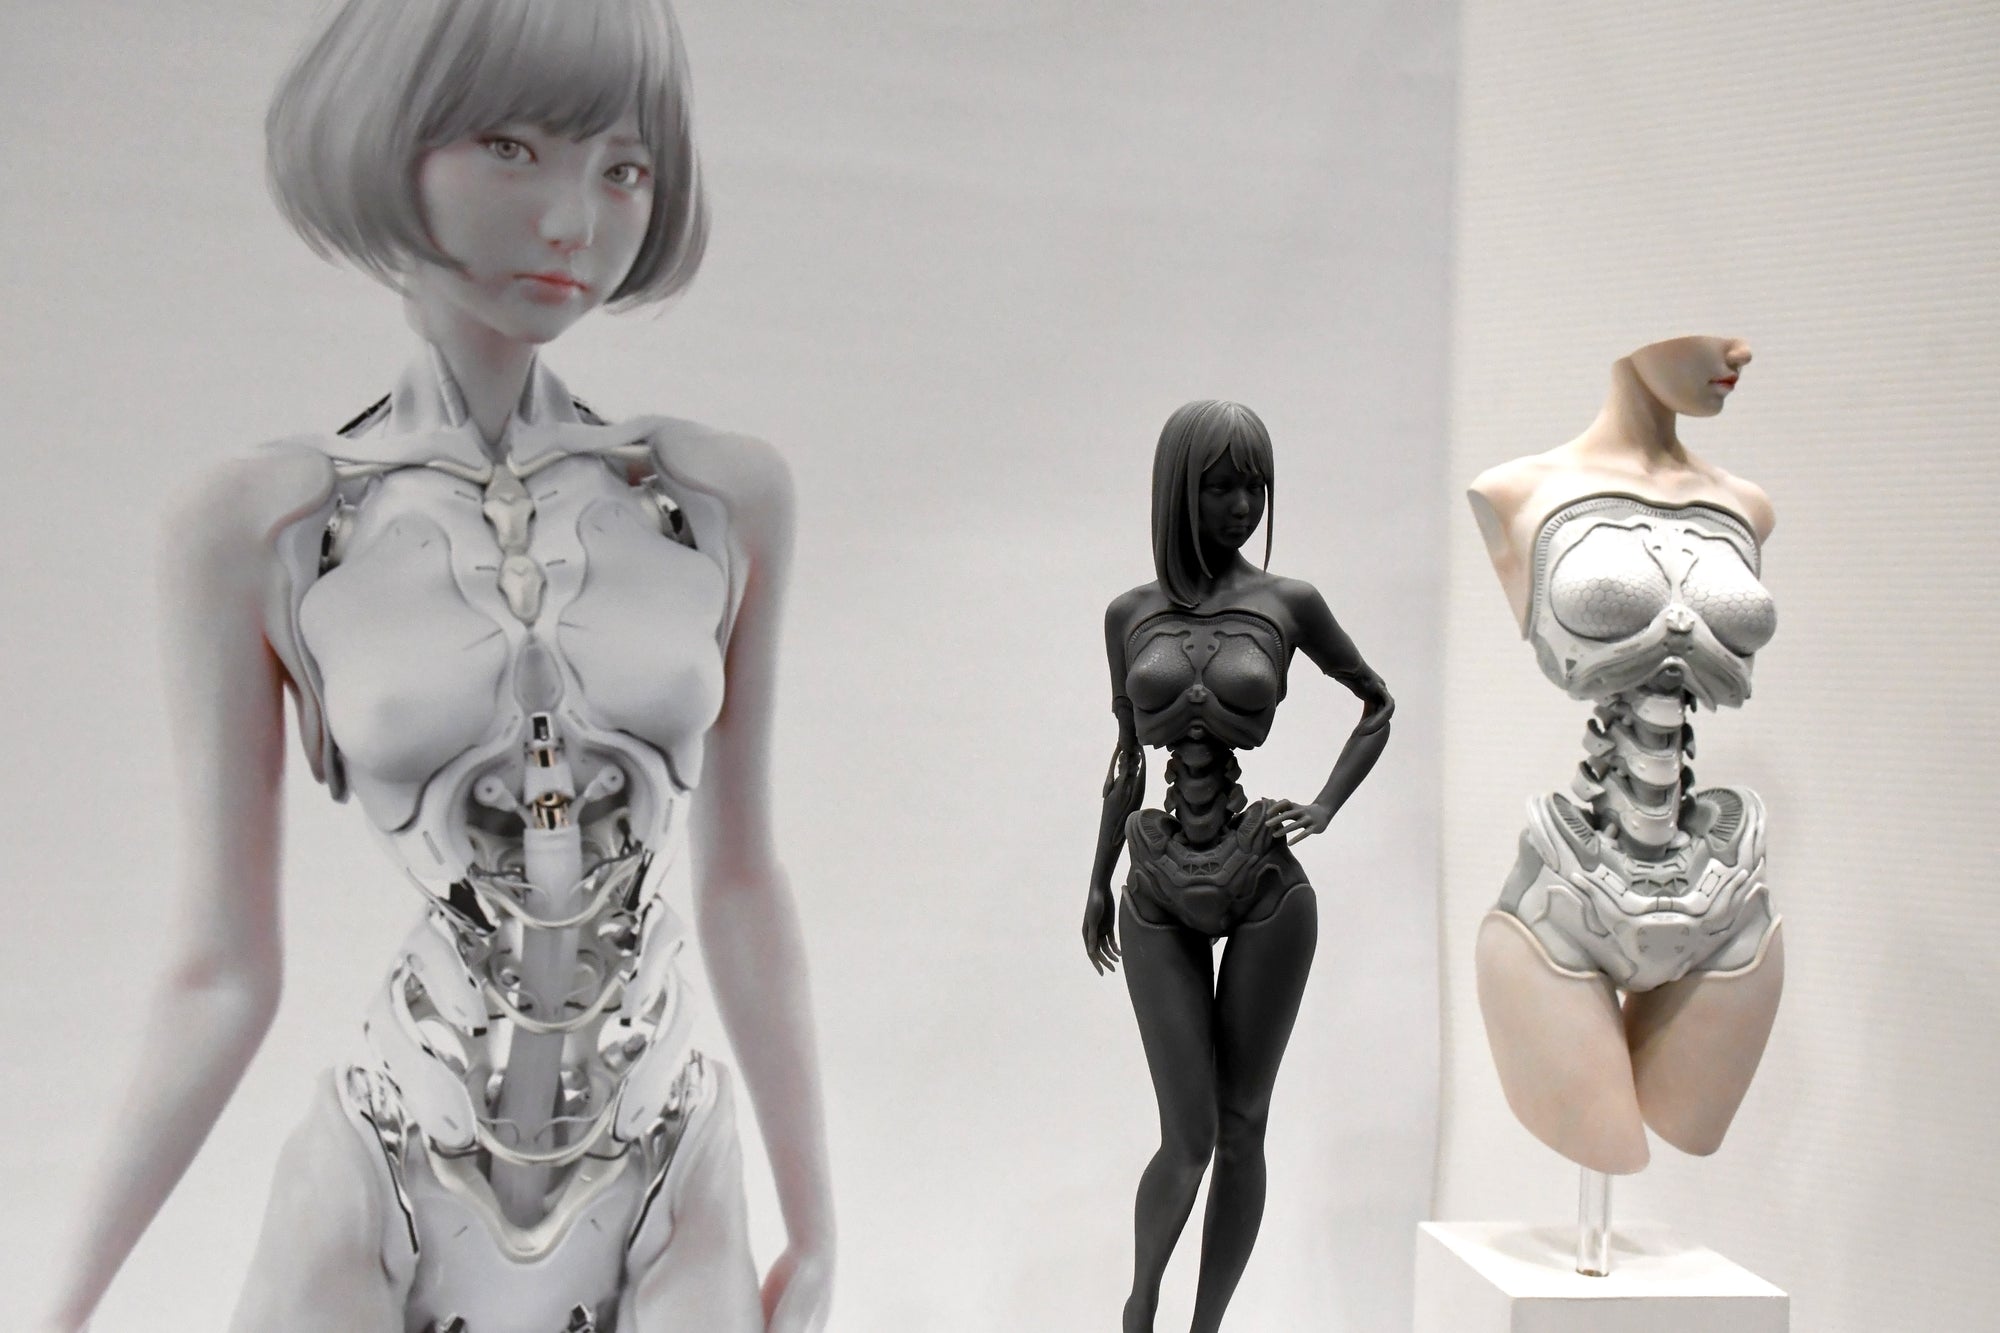 Wondrous Products at 2020 Winter Wonder Festival